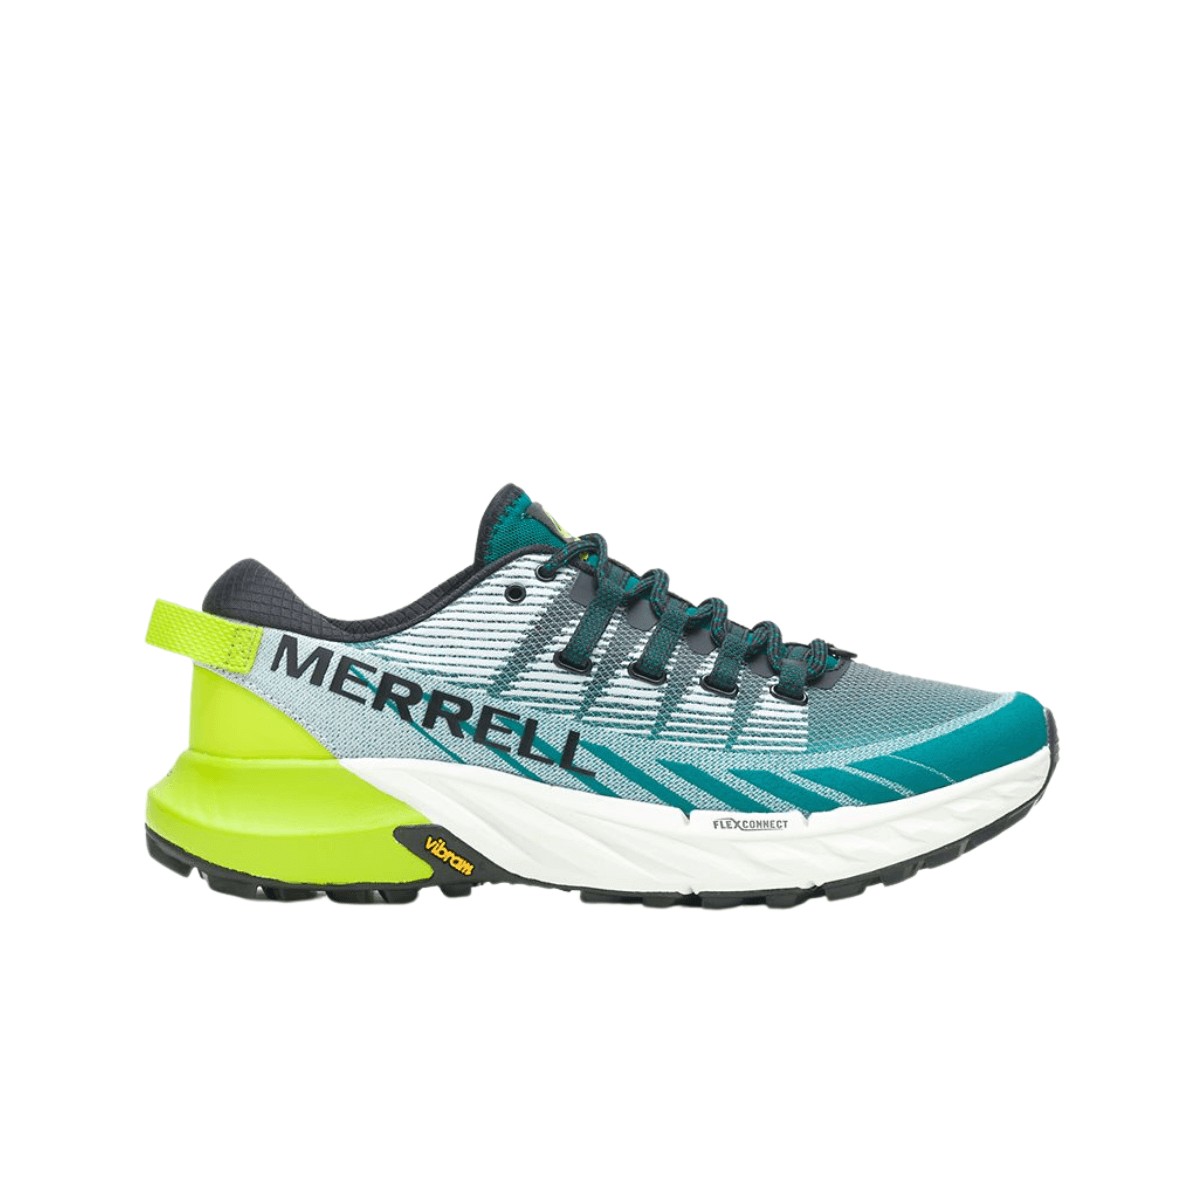 Chaussures Merrell Agility Peak 4 Vert Turquoise AW22, Taille 41,5 - EUR